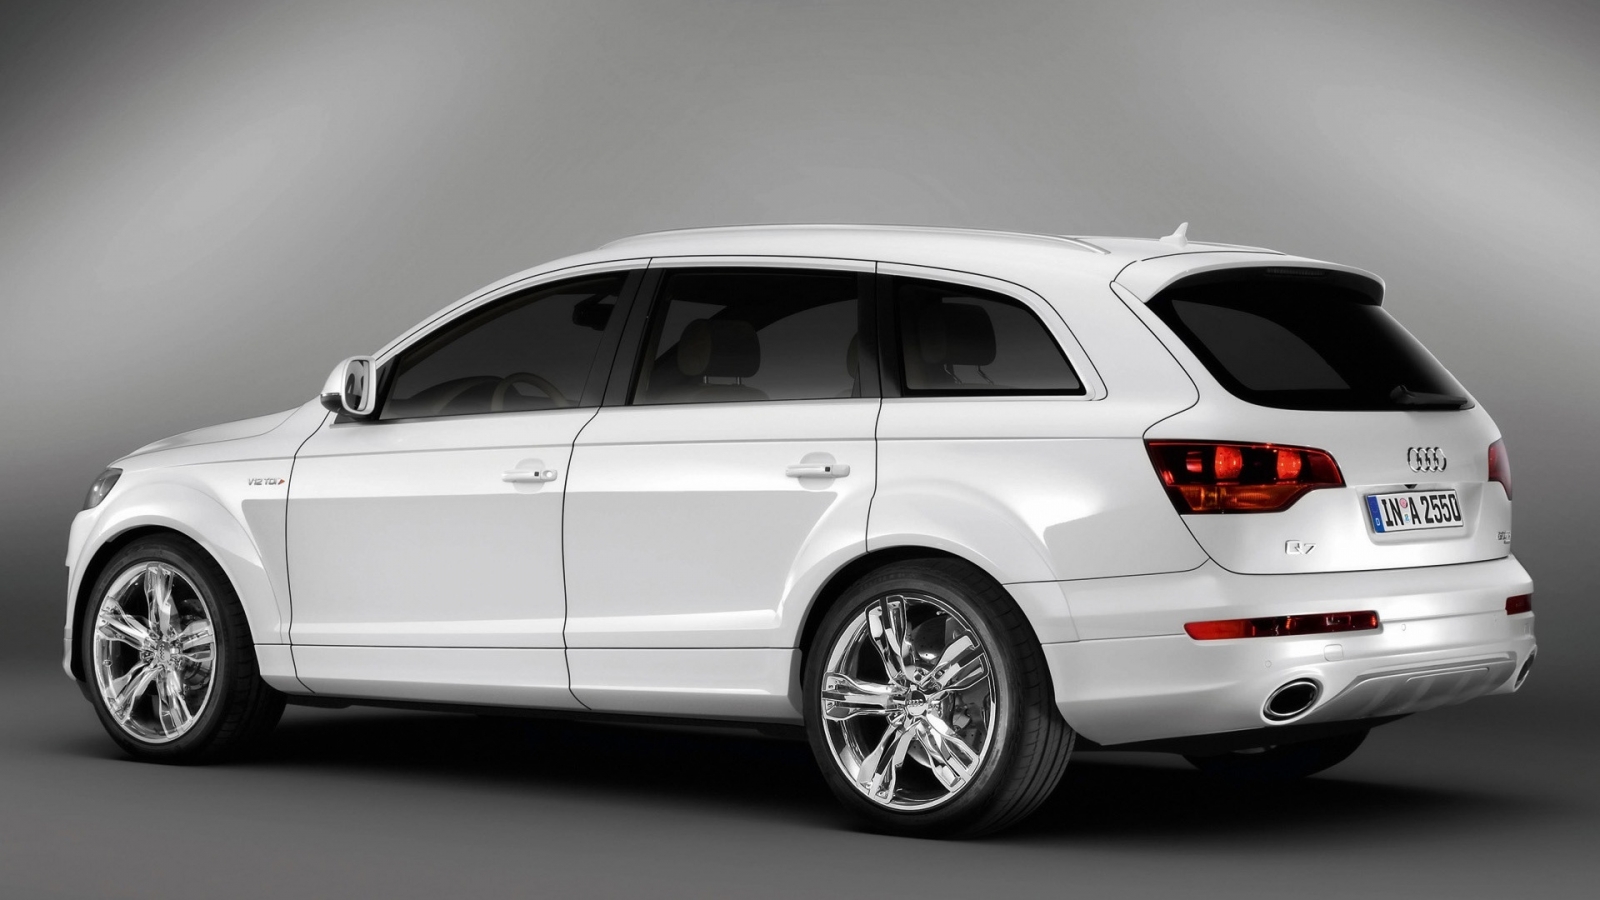 Audi Q7 Coastline Rear and Side for 1600 x 900 HDTV resolution